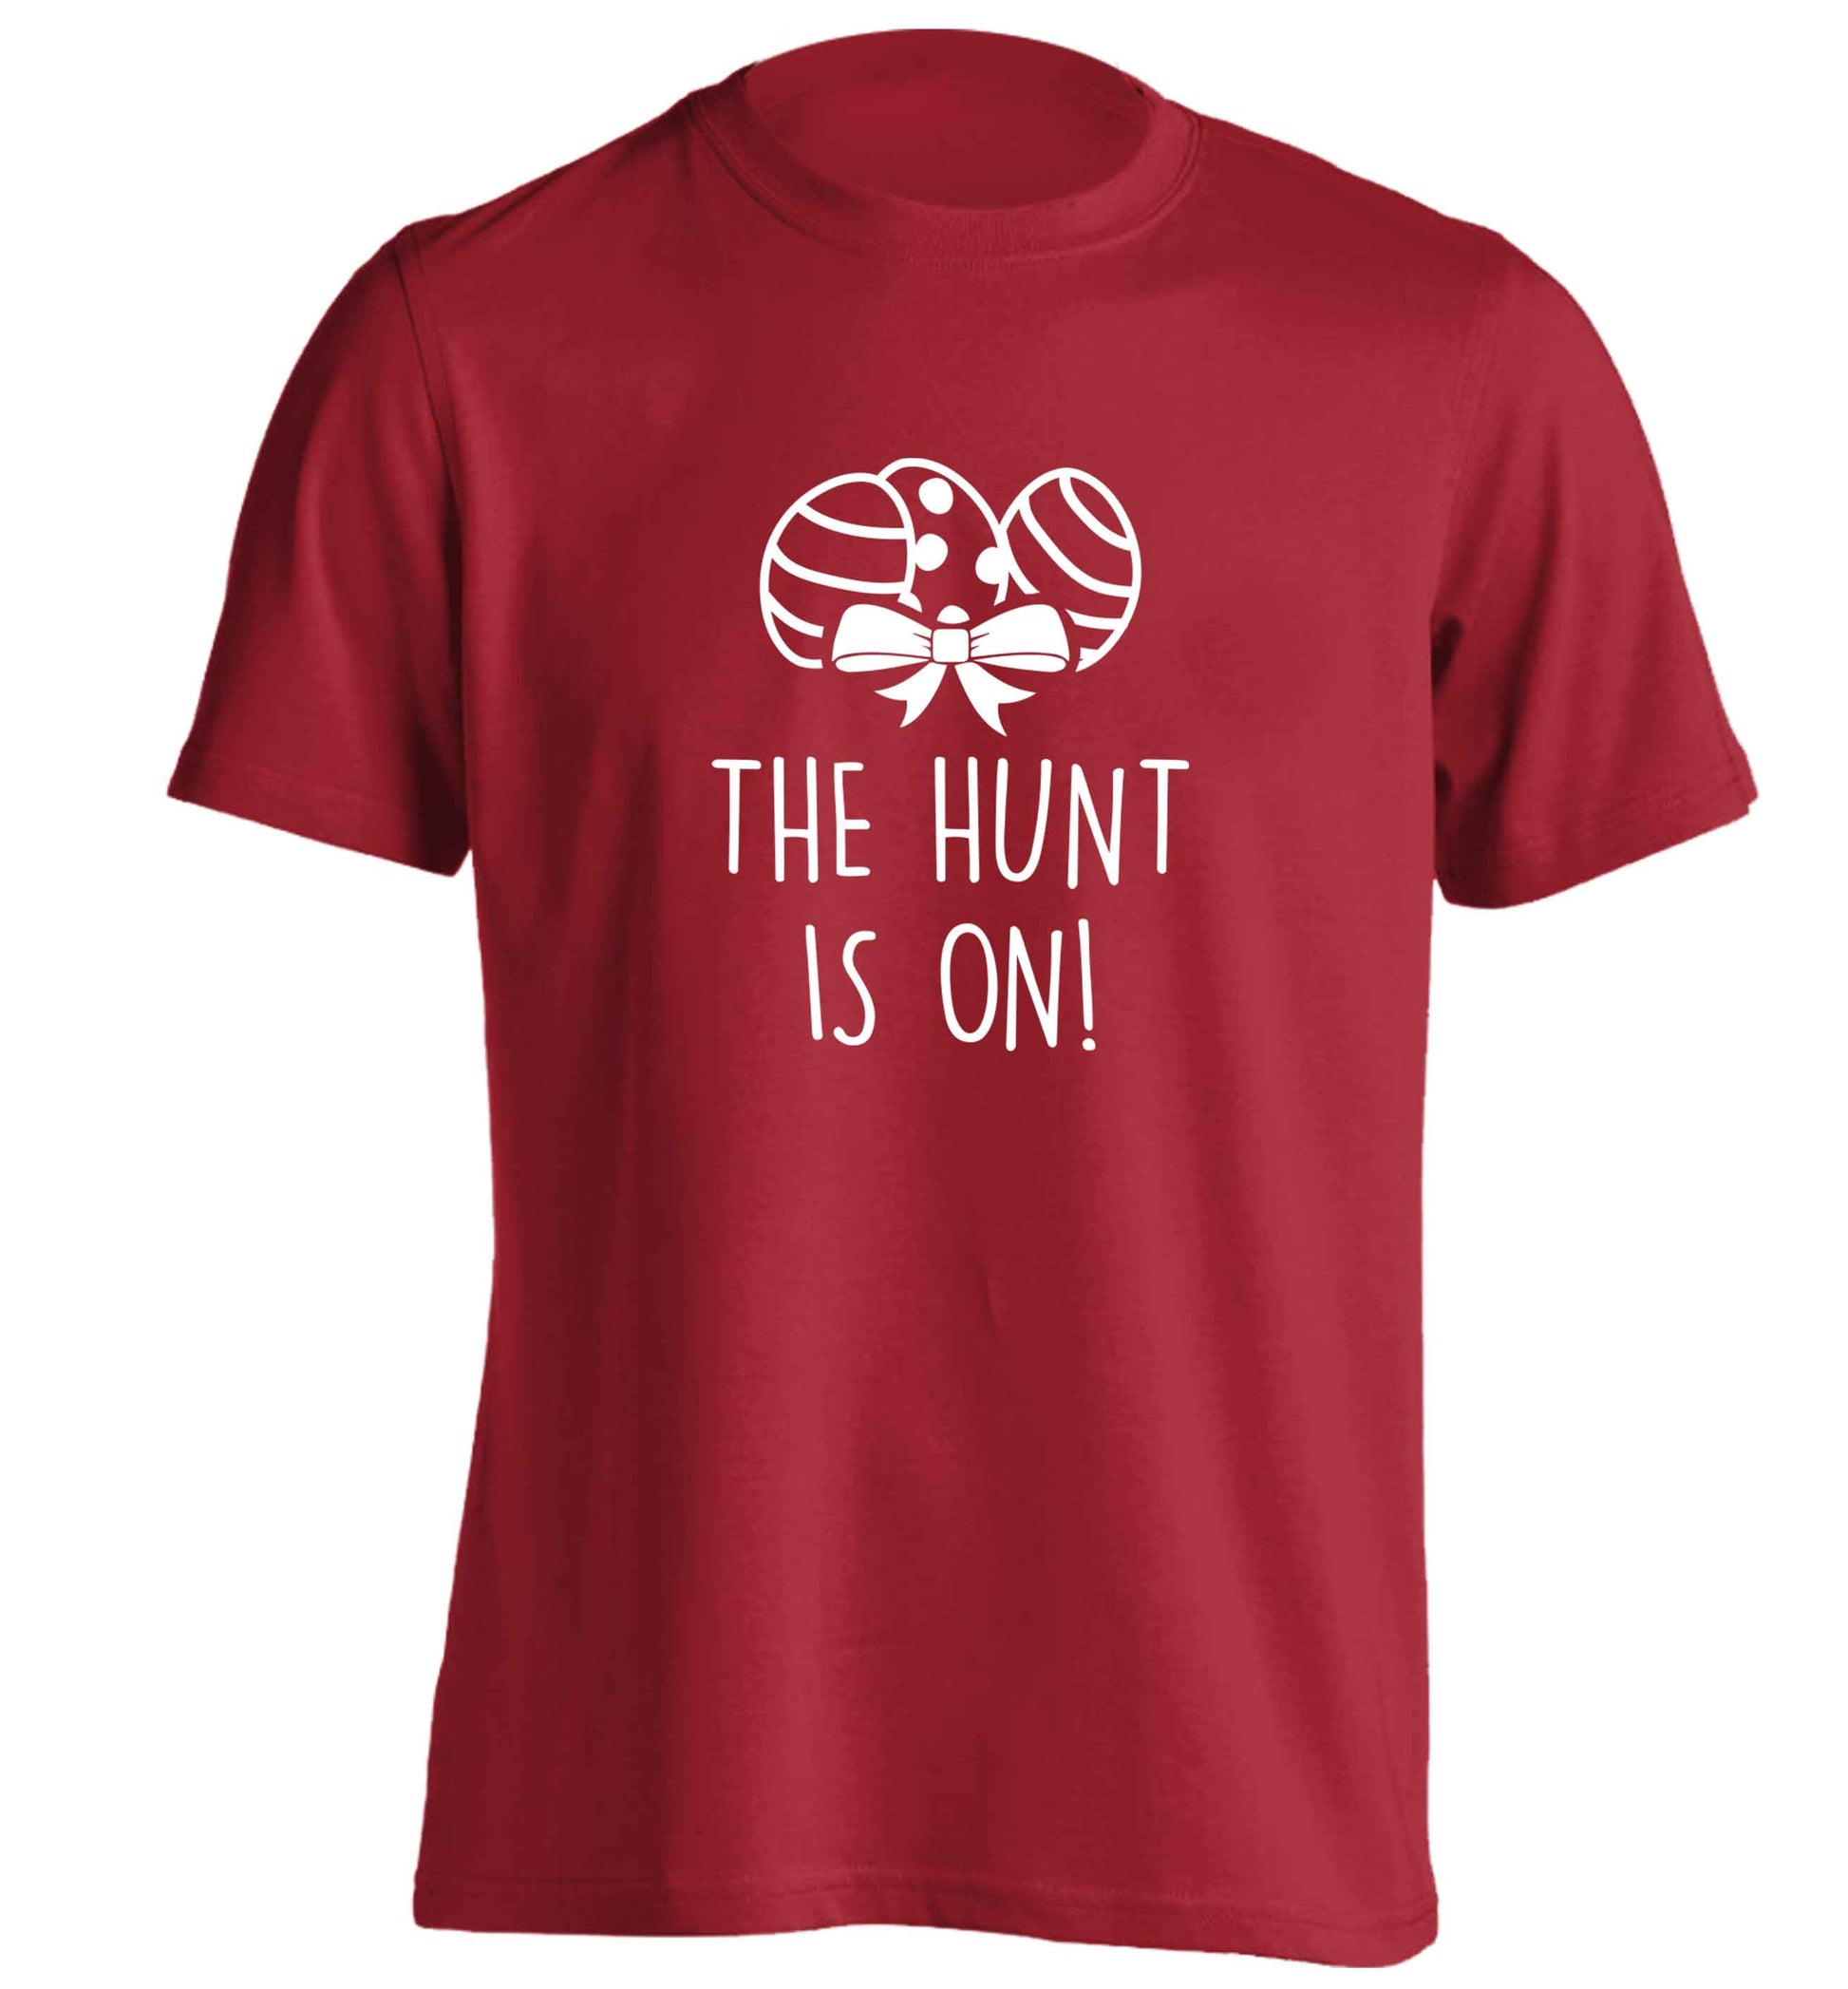 The hunt is on adults unisex red Tshirt 2XL